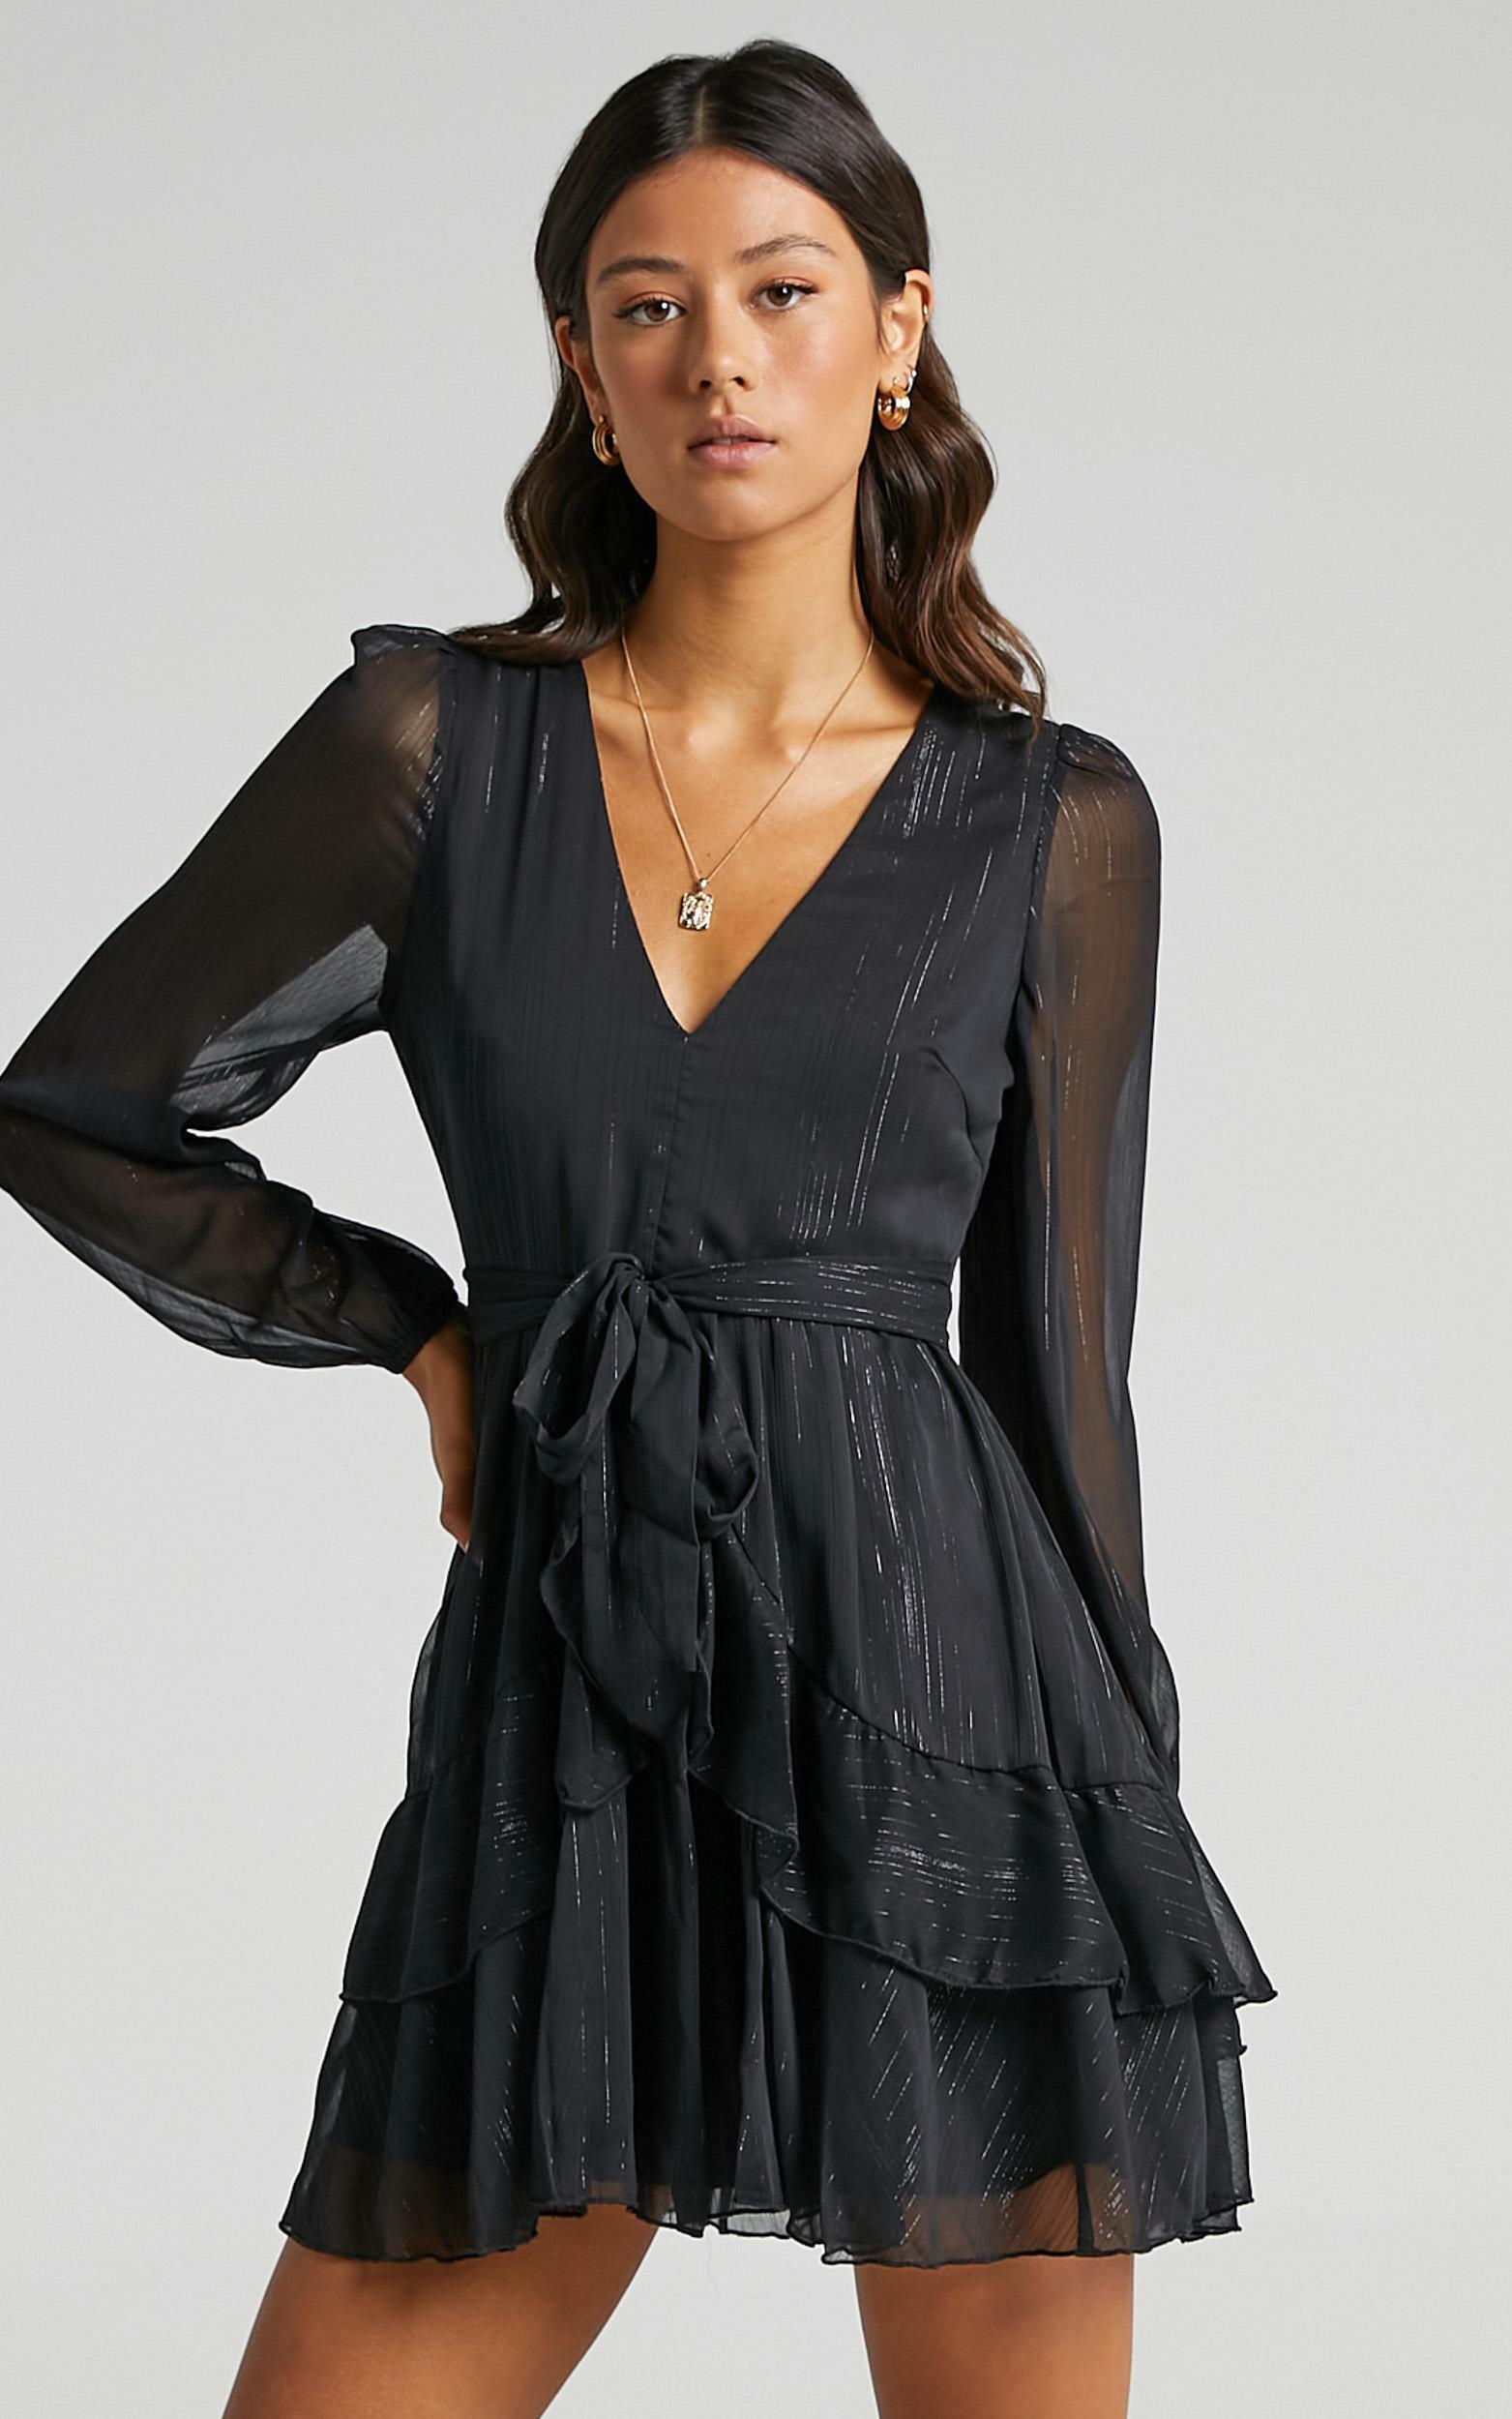 Eyes That Know Me Long Sleeve Ruffle Mini Dress in Black - 06, BLK1, hi-res image number null